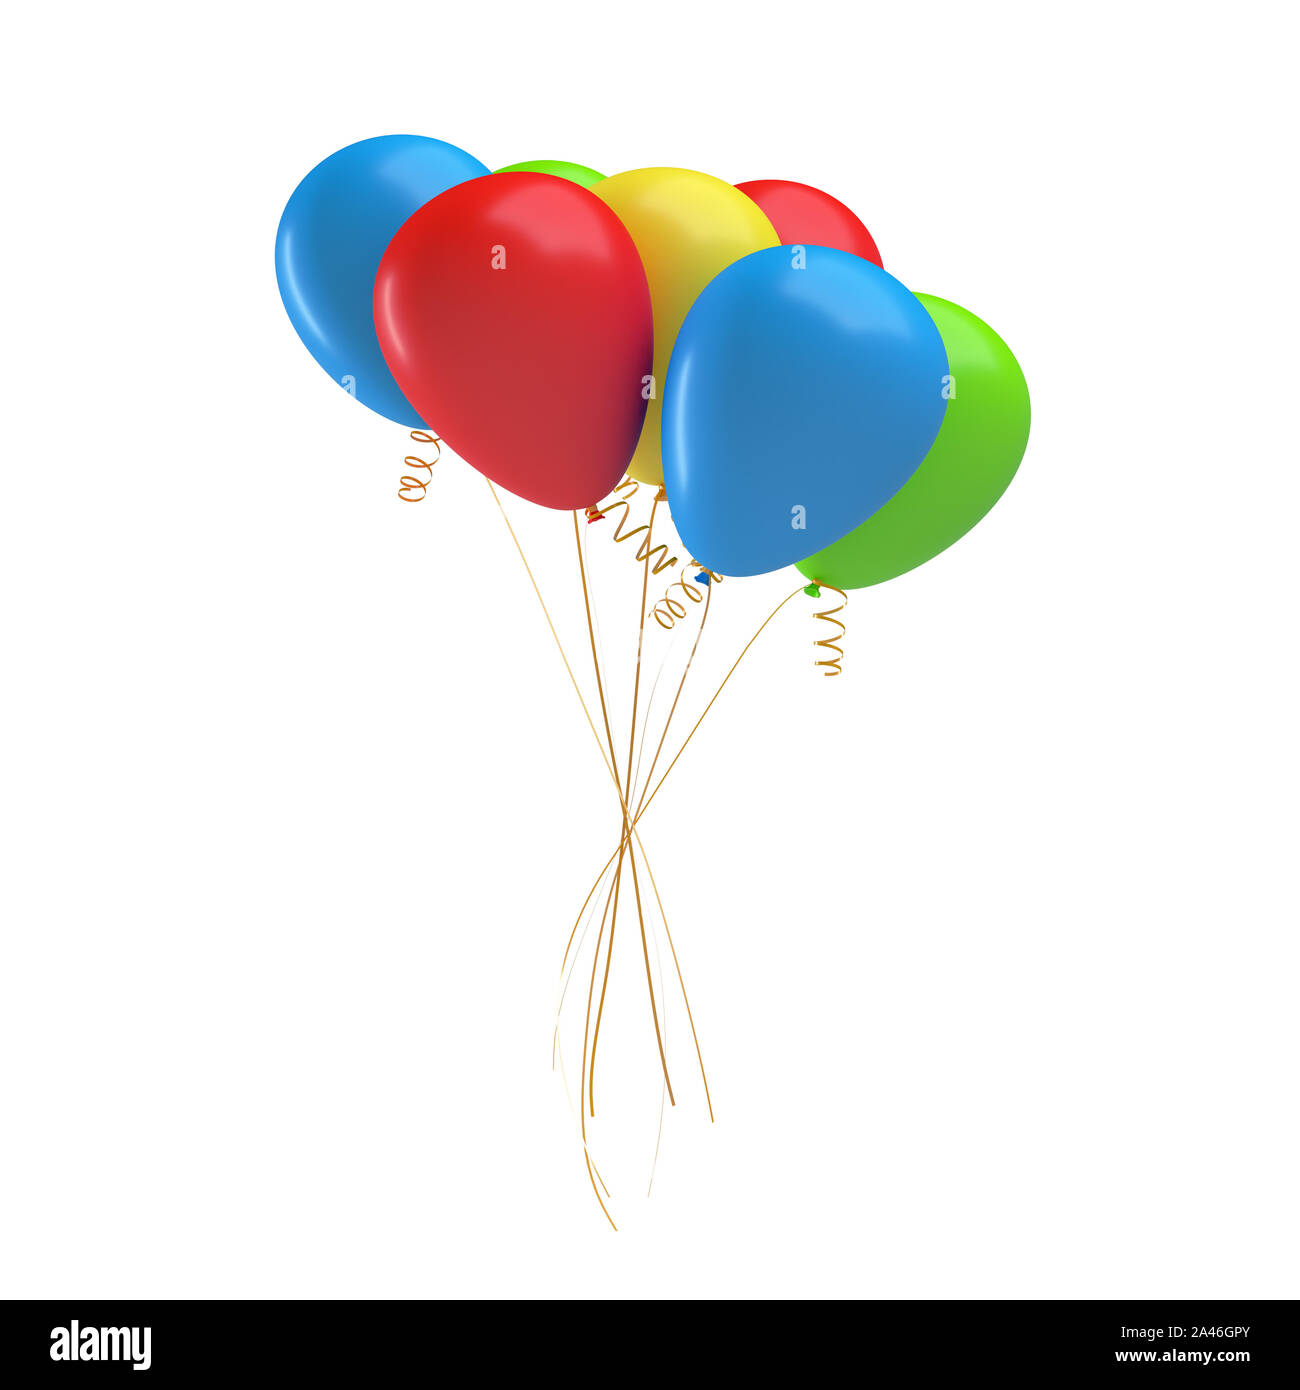 https://c8.alamy.com/comp/2A46GPY/3d-rendering-of-many-colorful-balloons-tied-together-with-a-string-gifts-and-greetings-celebrations-and-opening-nights-birthday-and-anniversary-2A46GPY.jpg